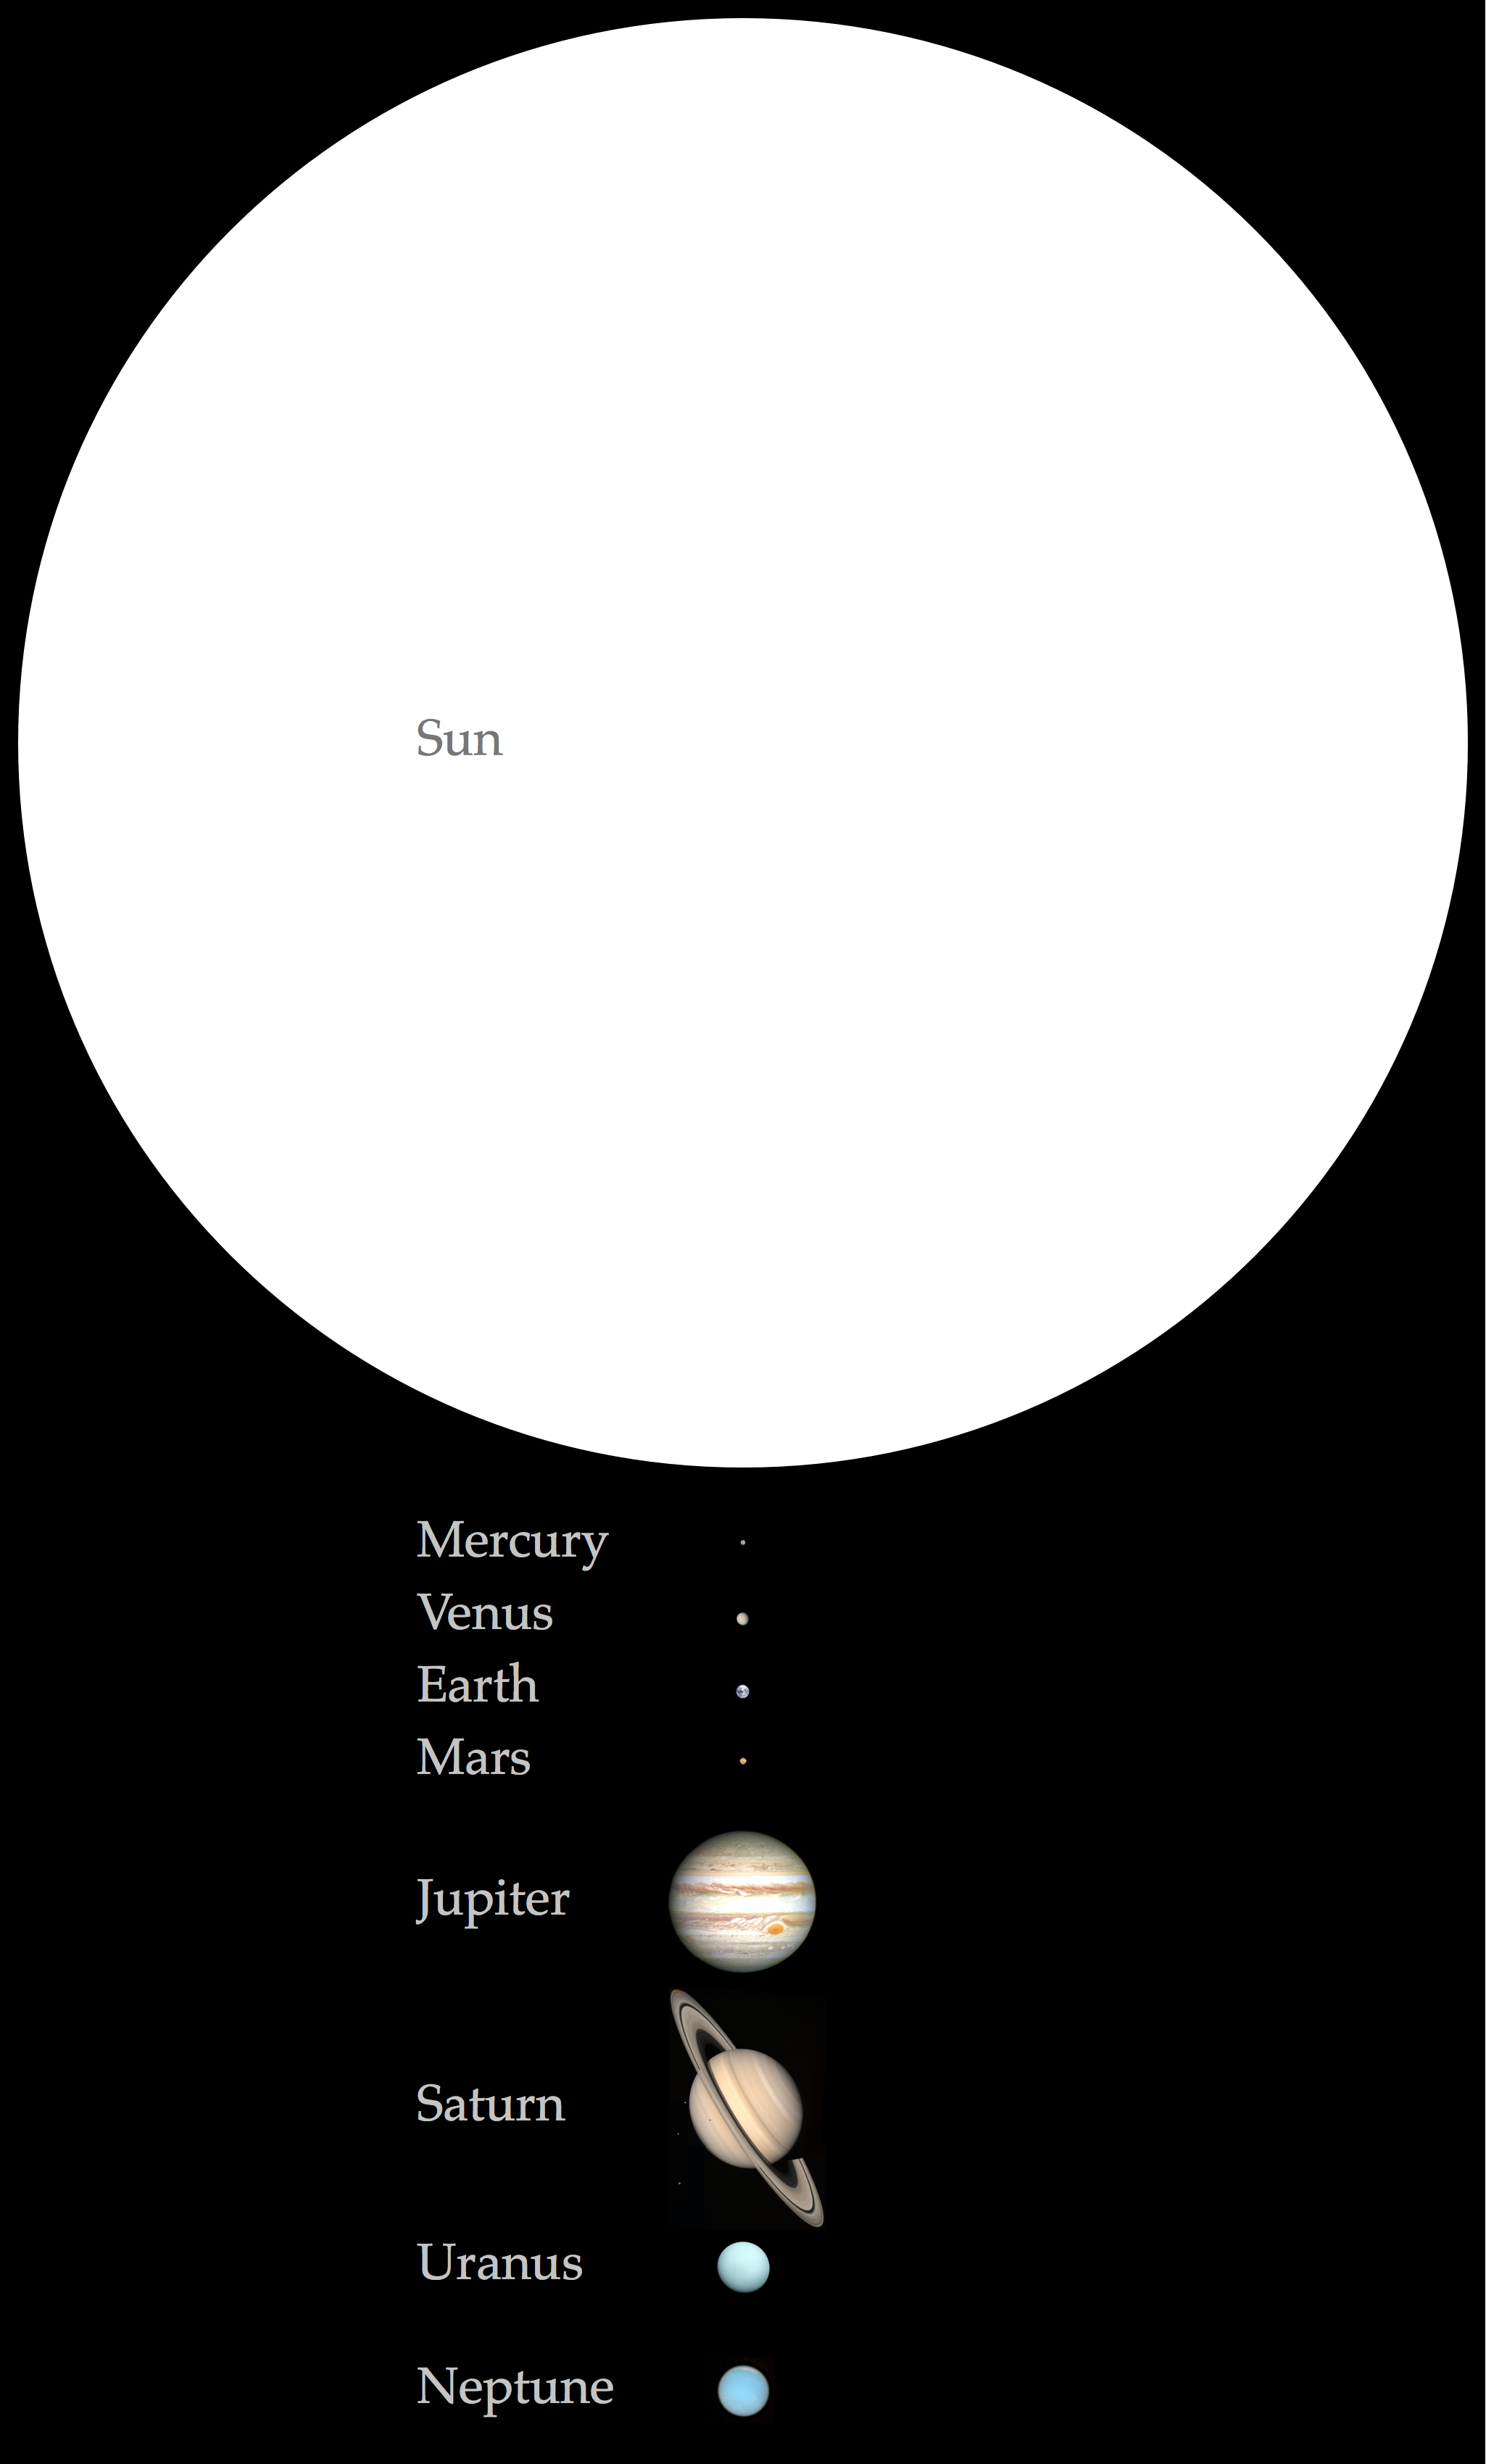 The Sun and planets in natural colors with correct relative sizes